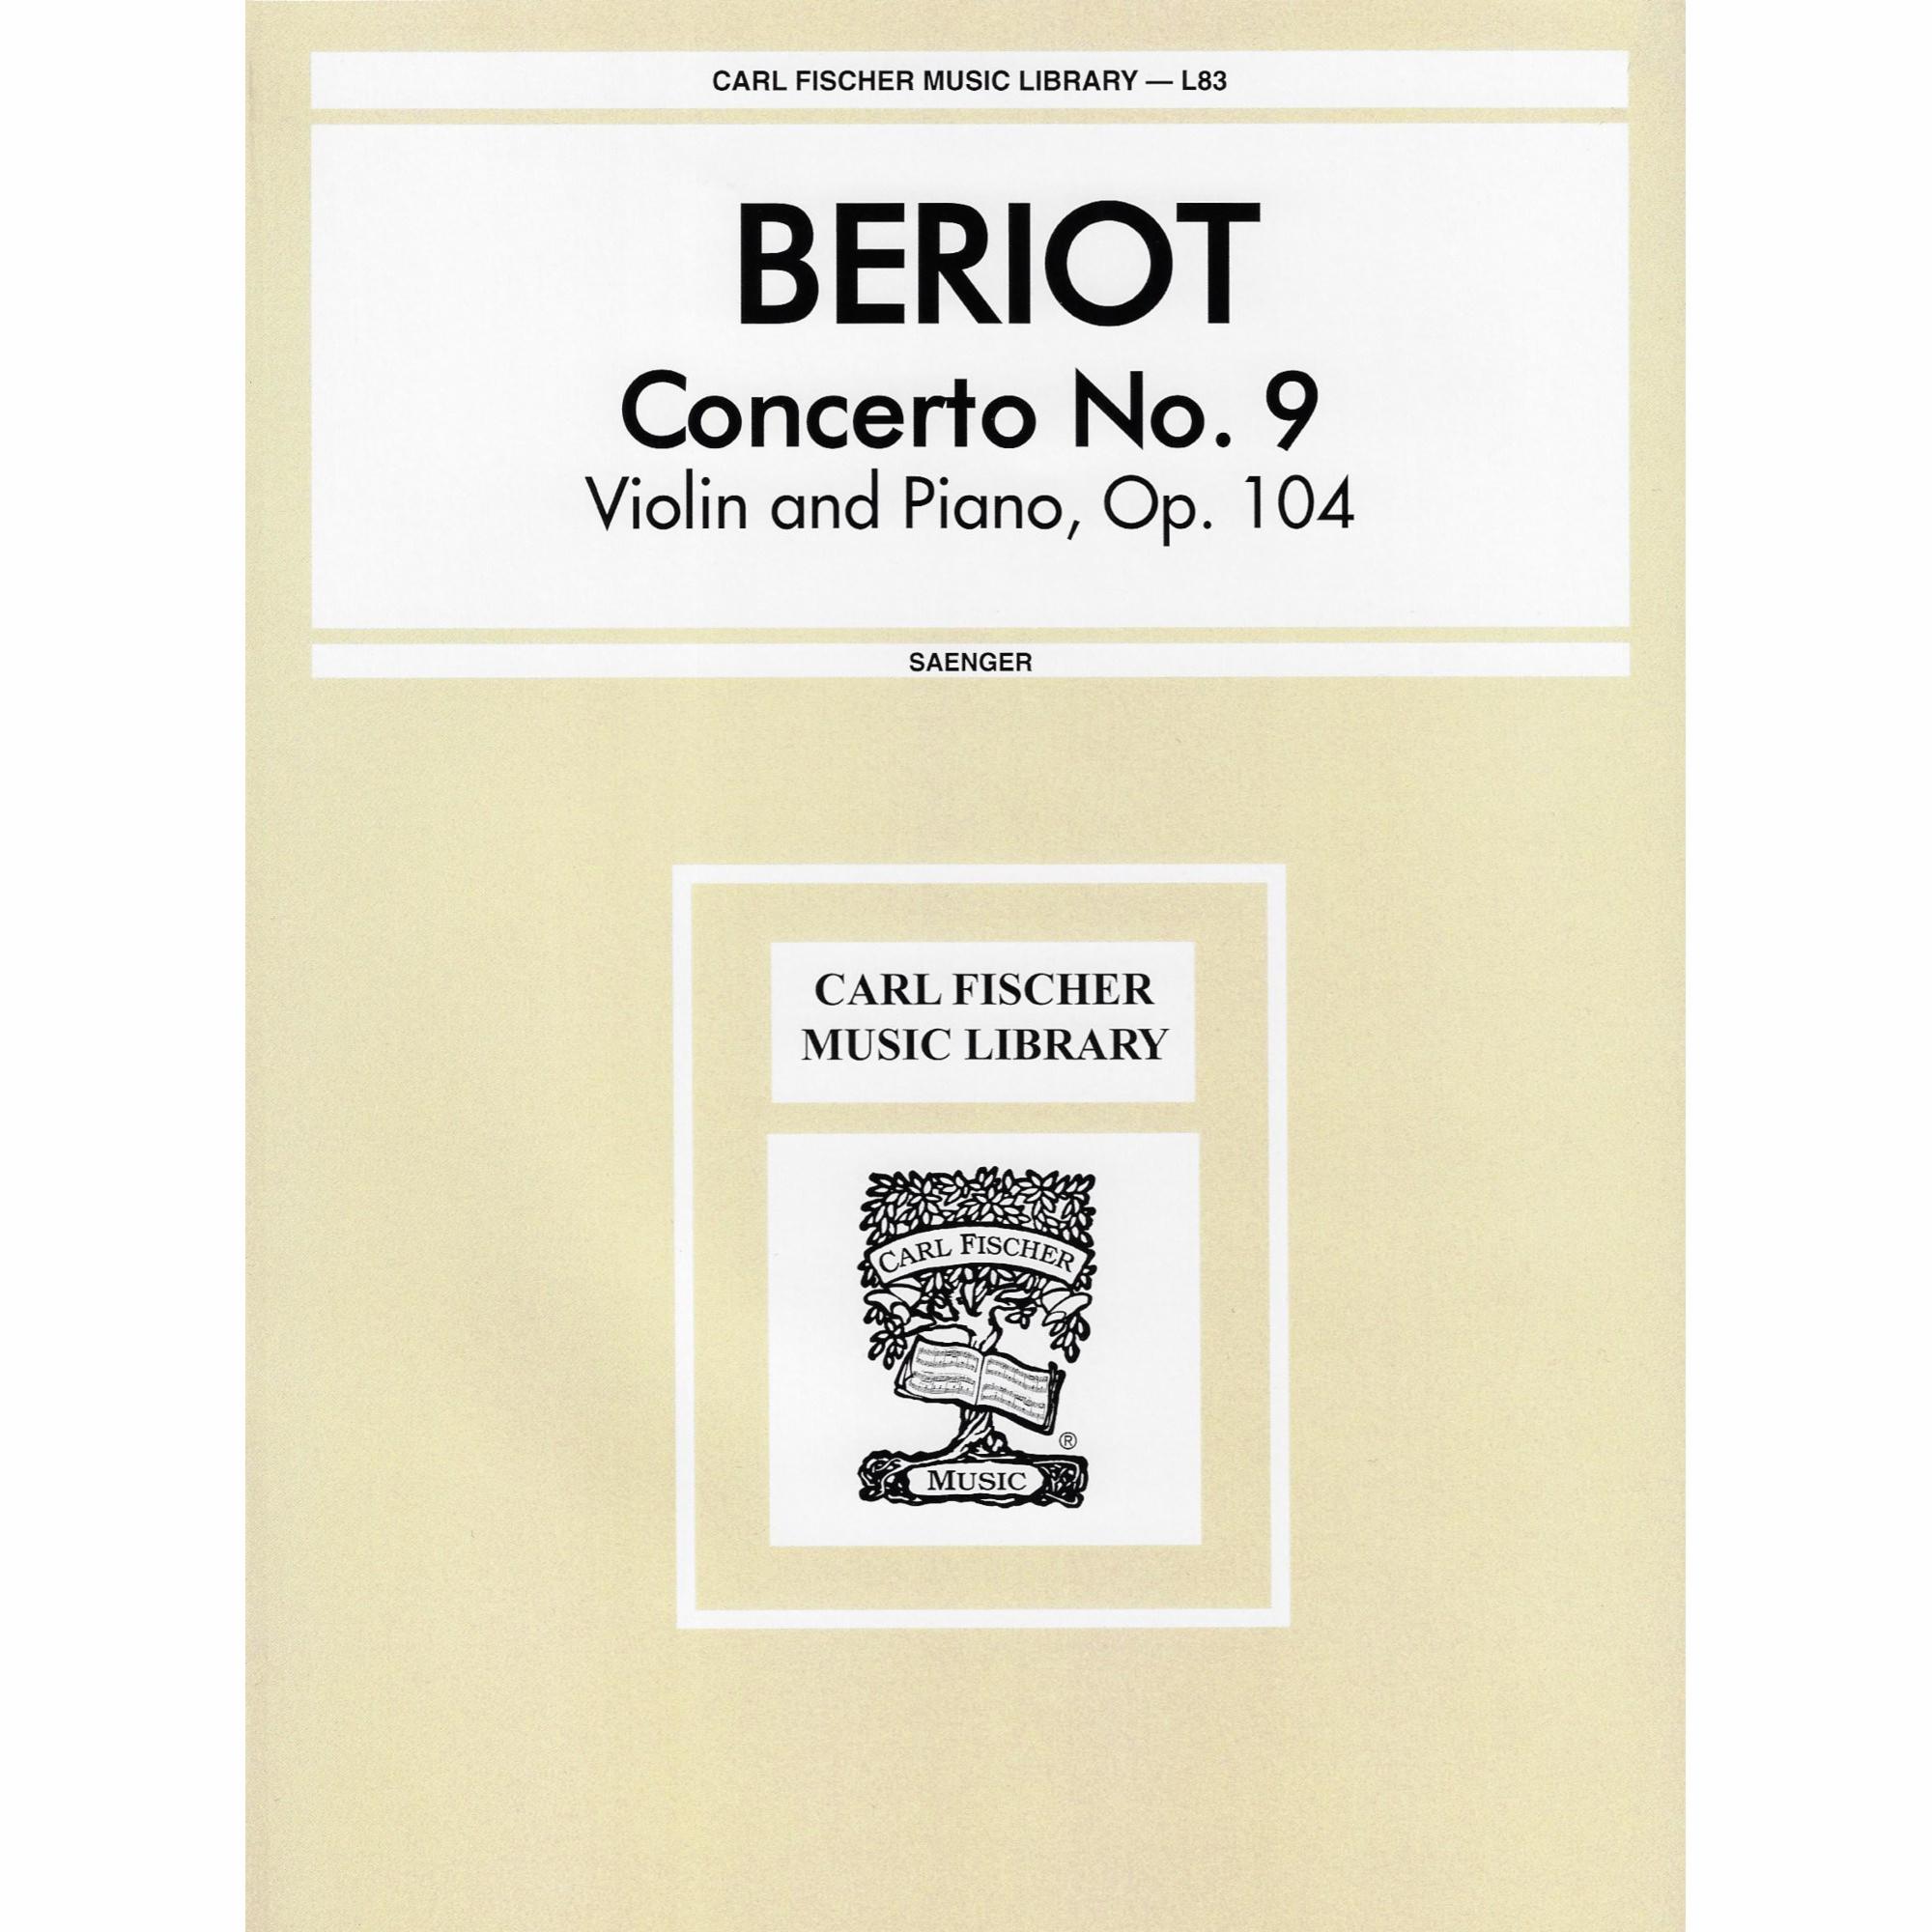 Beriot -- Concerto No. 9, Op. 104 for Violin and Piano